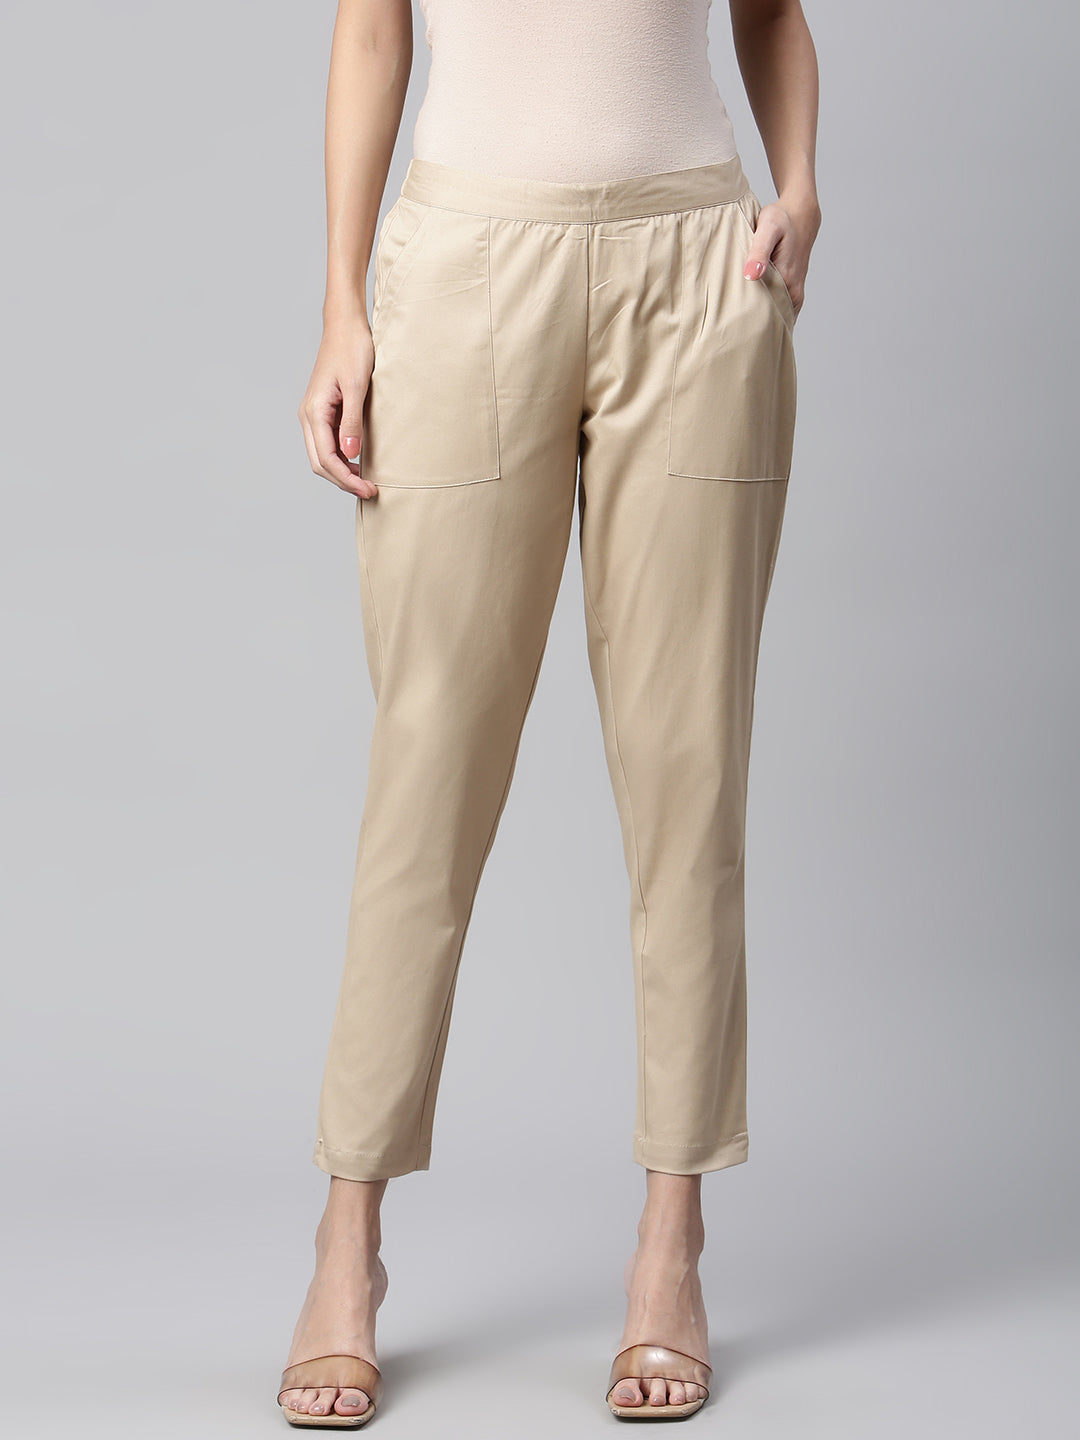 All Purpose Casual Stretchable Ealsticated Beige Pants 